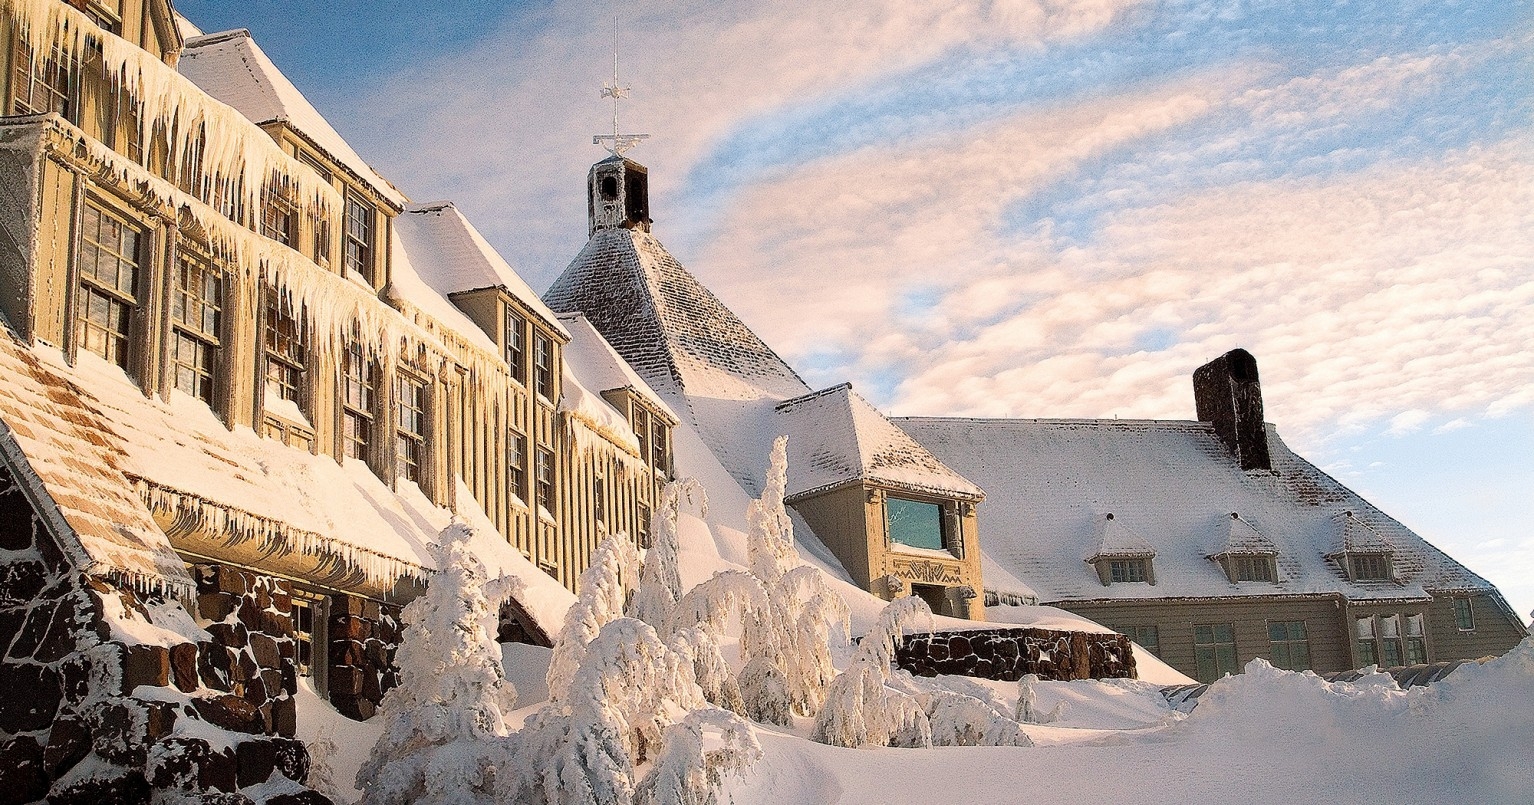 SNOW AND ICE COVERED TIMBERLINE LODGE 